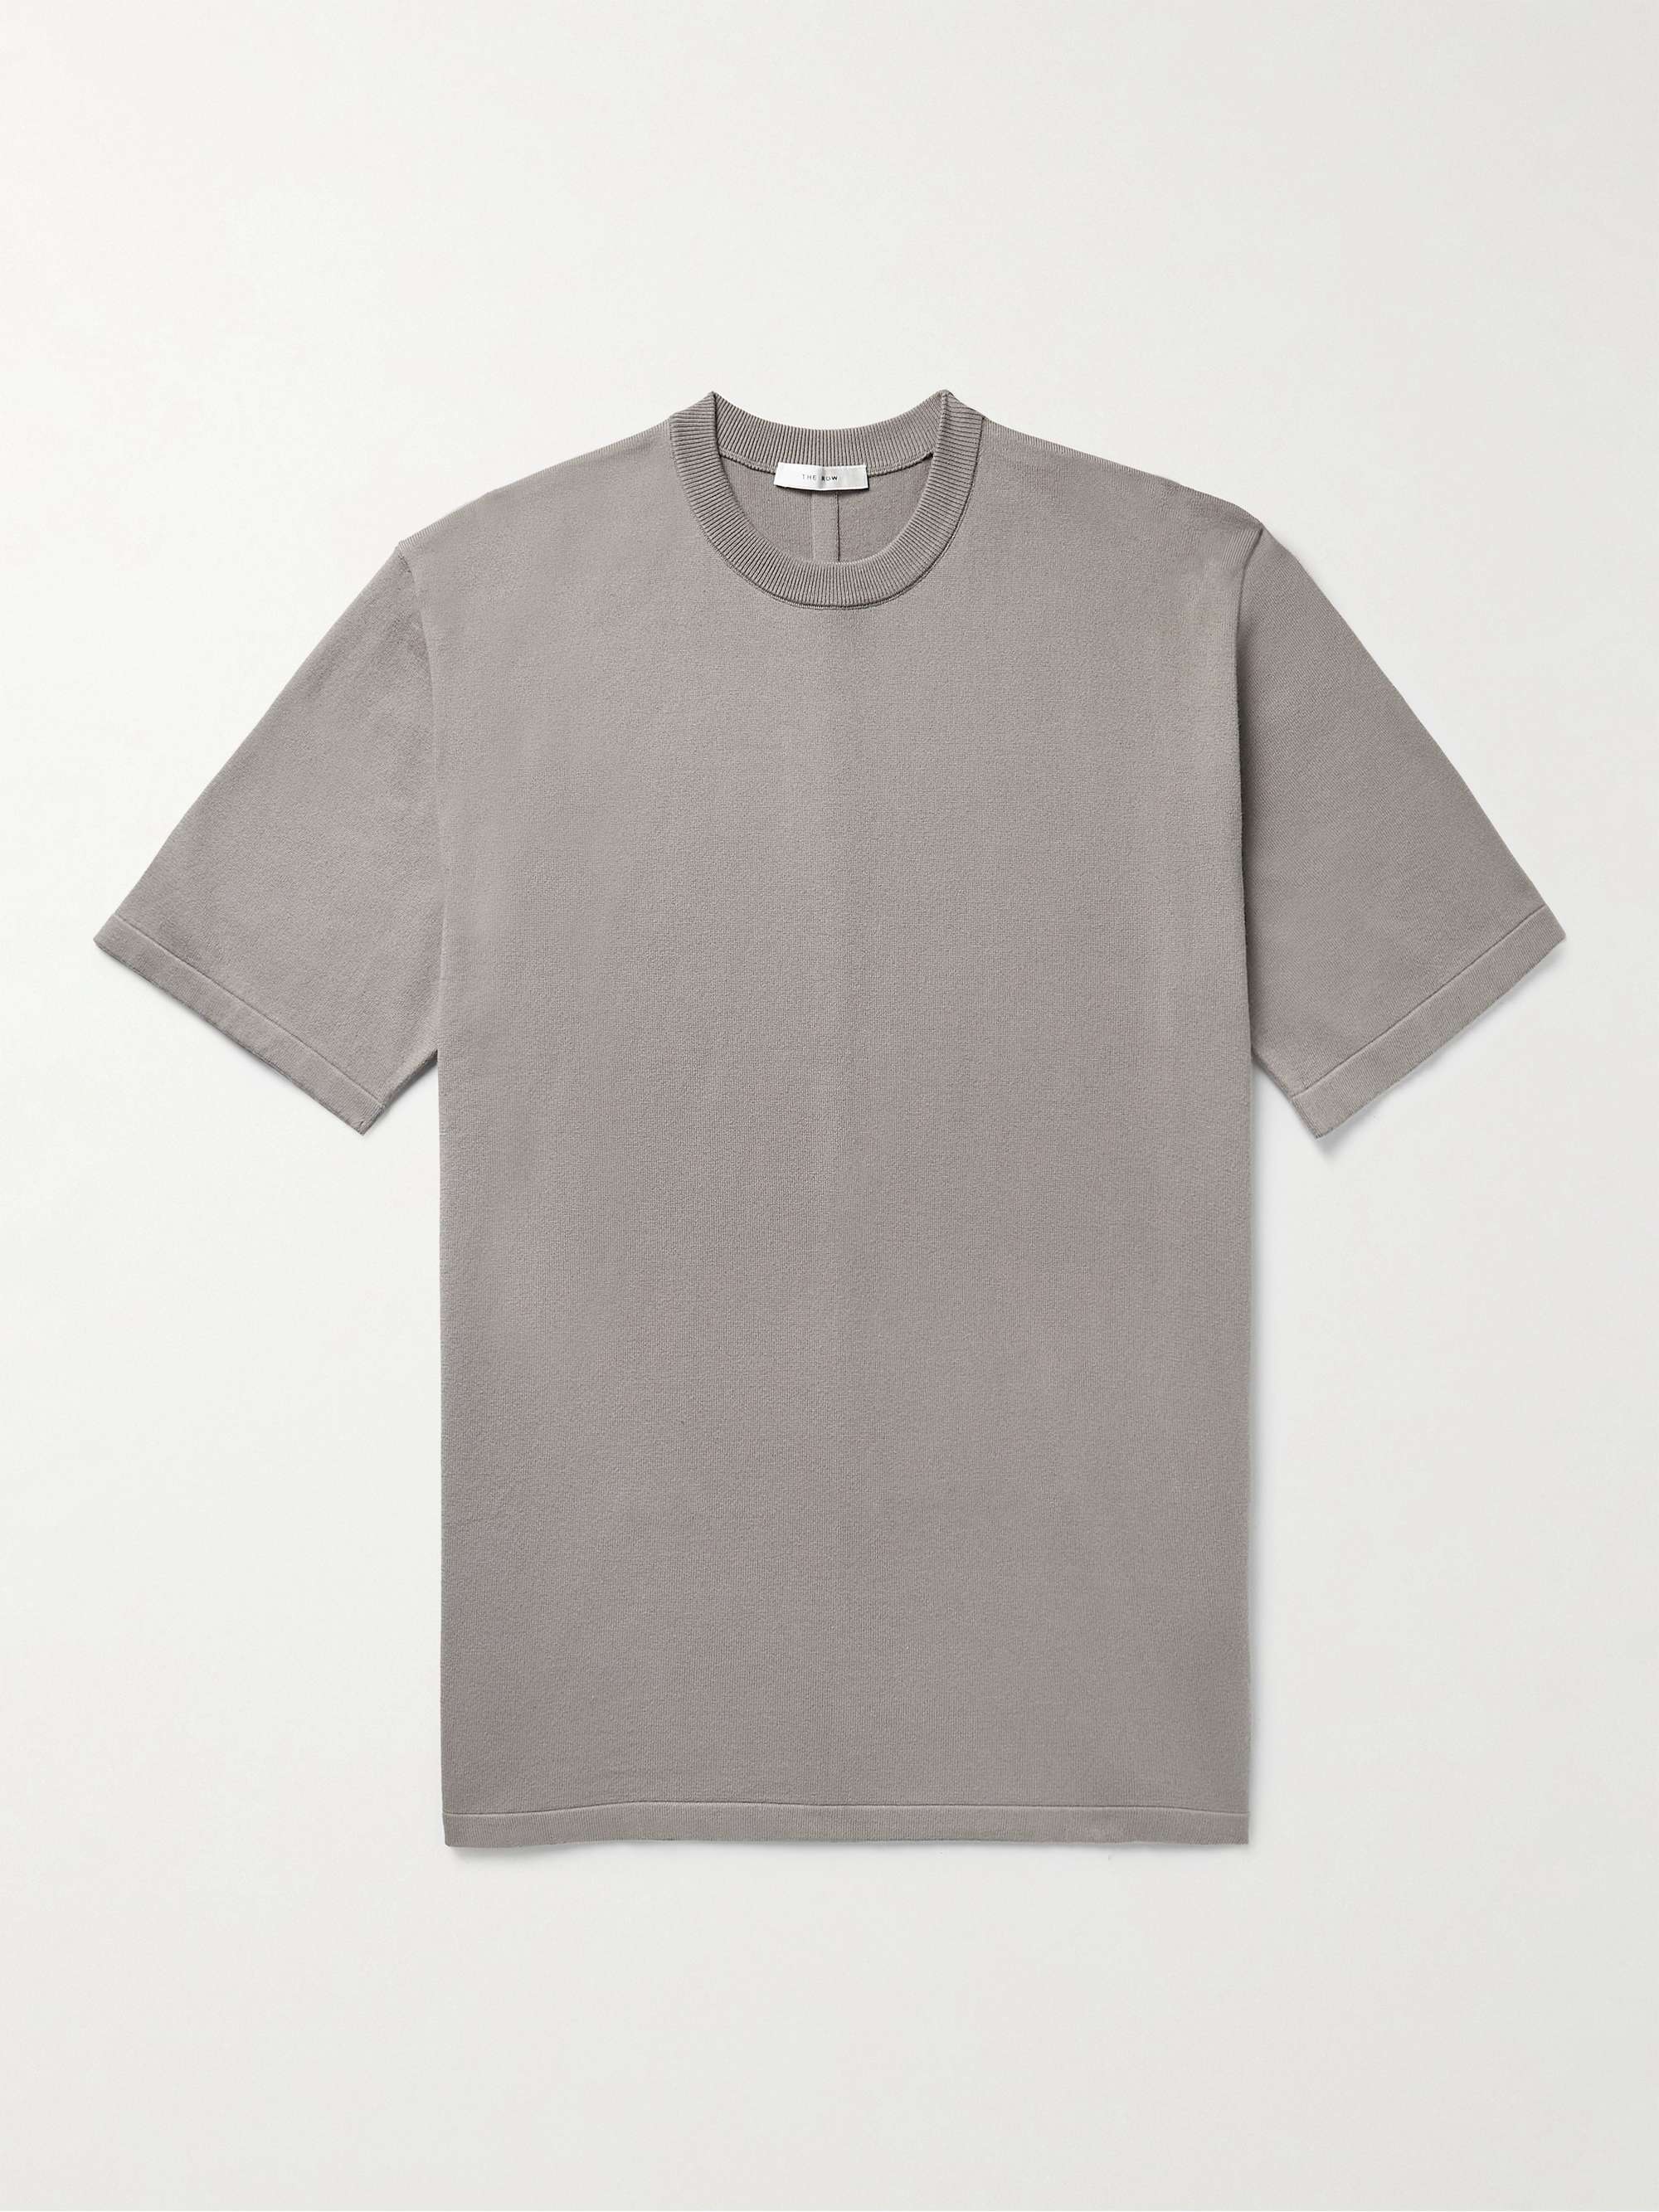 Taupe Munza Cotton T-Shirt | THE ROW | MR PORTER